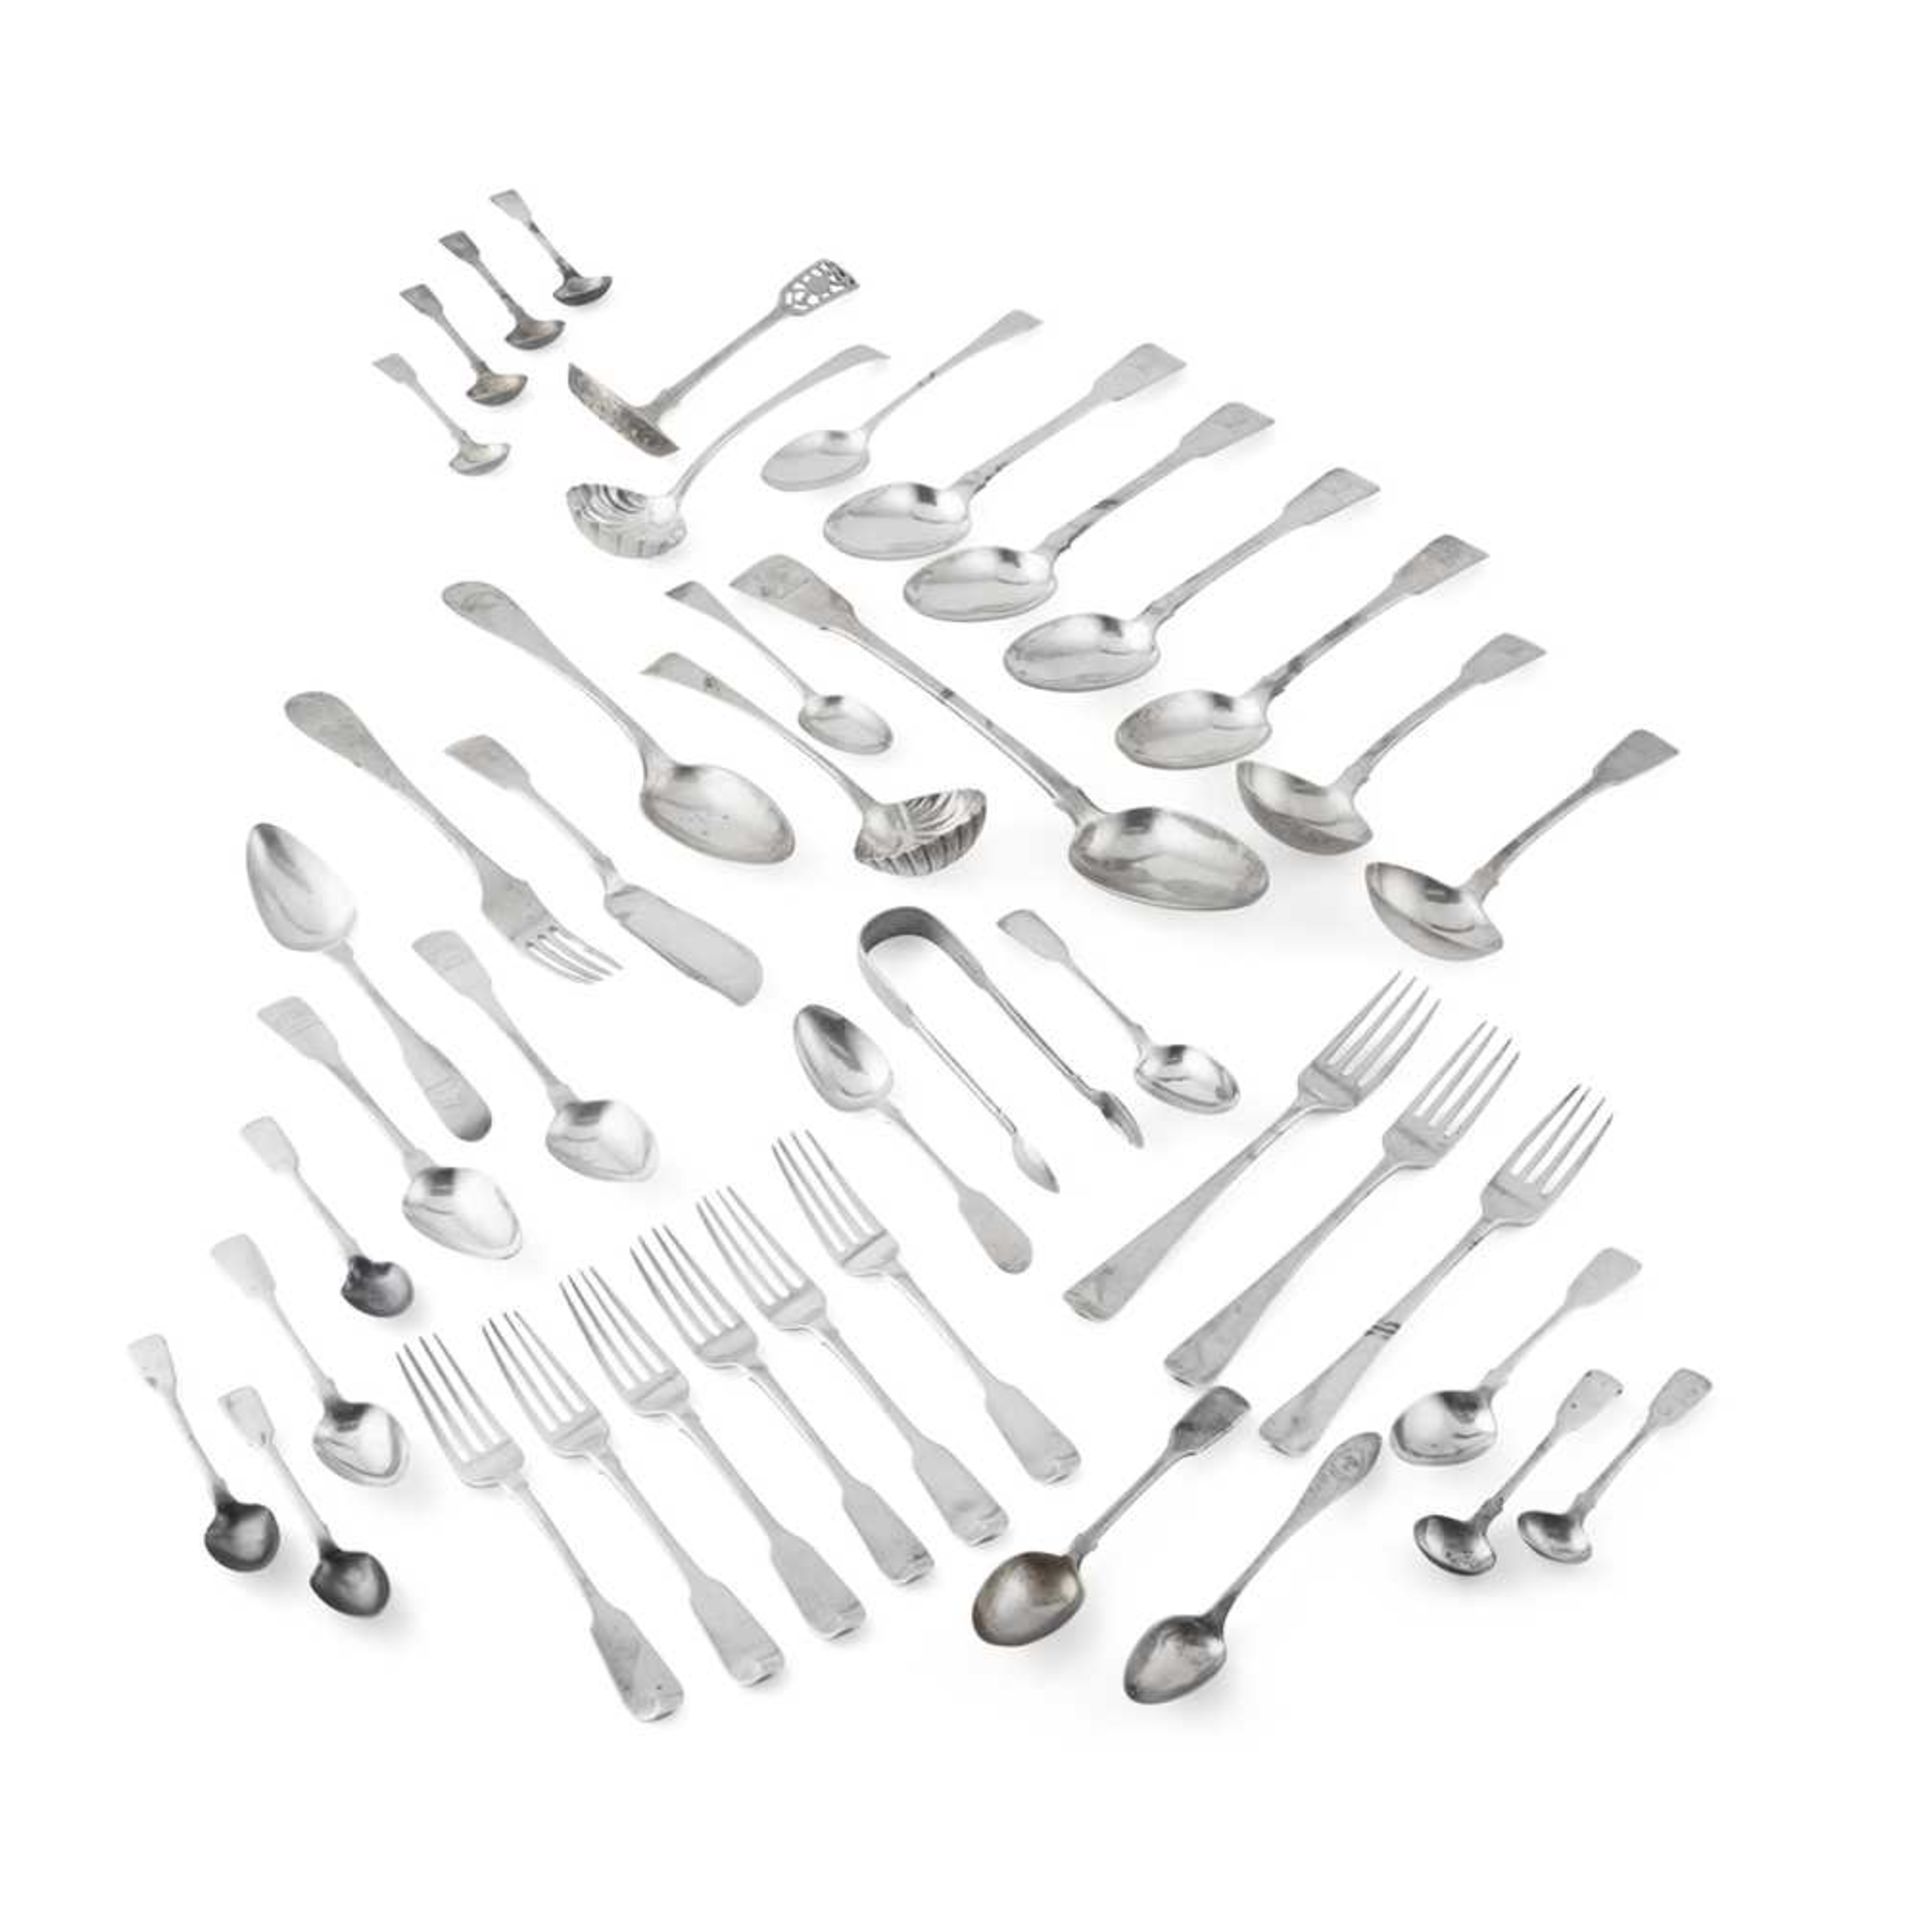 A collection of miscellaneous flatware